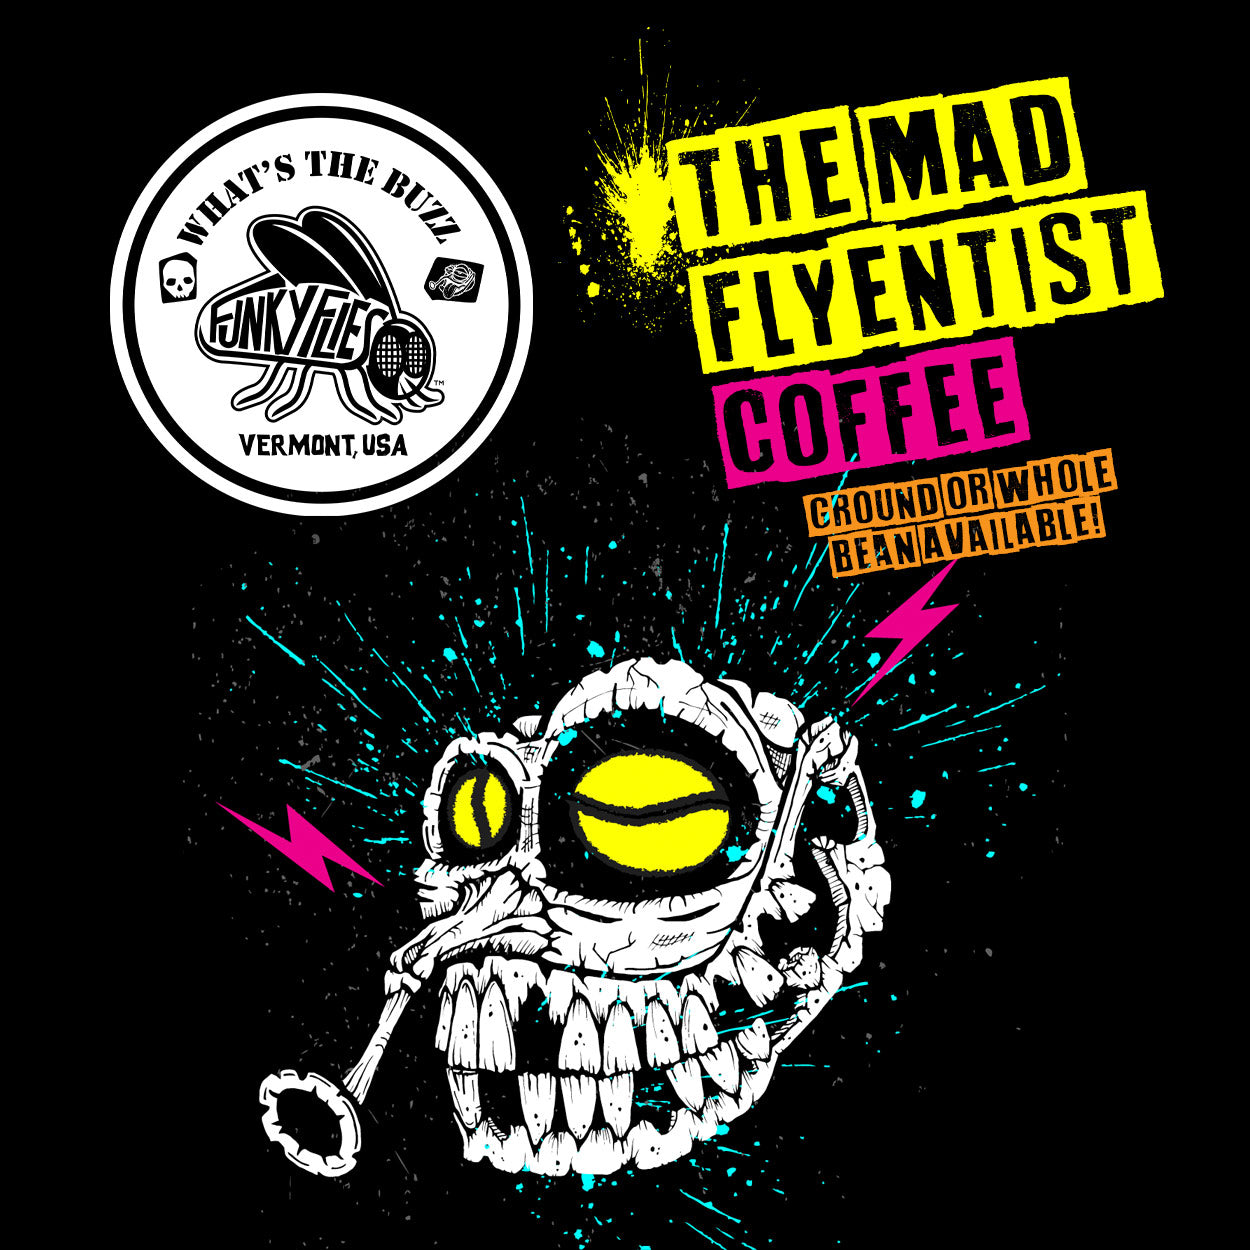 Exploring Mad Flyentist Coffee in Vermont